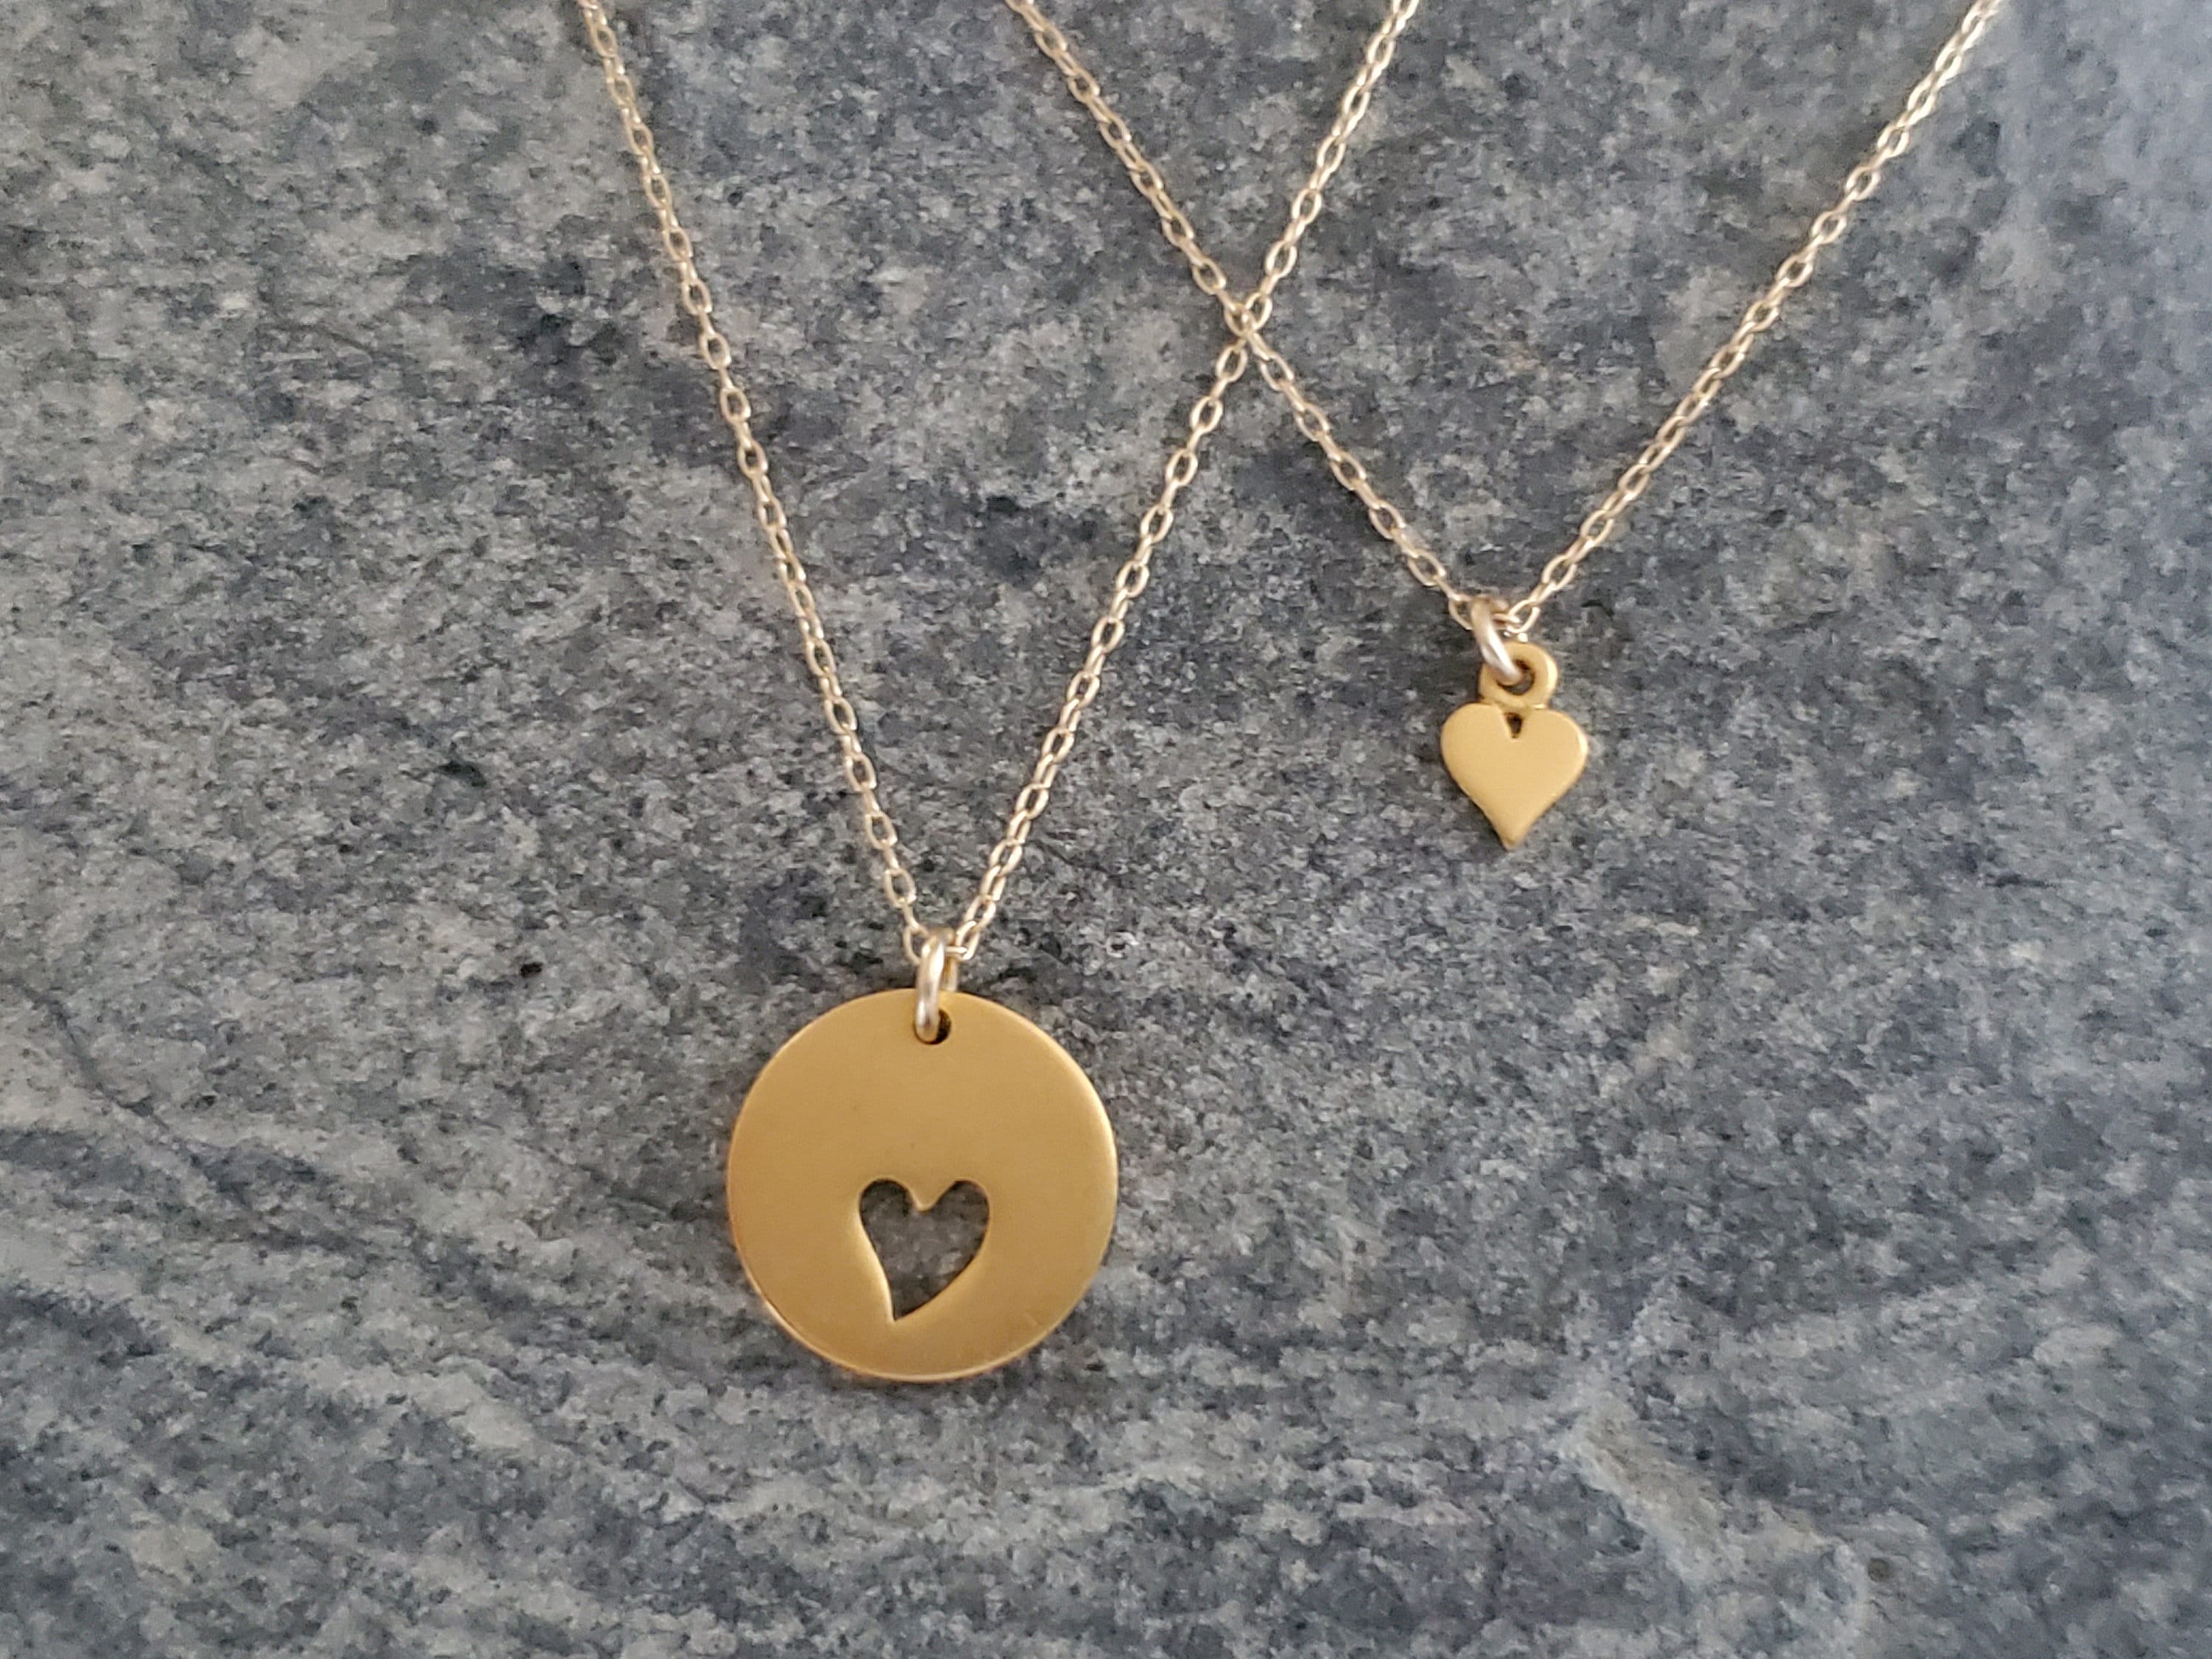 Buy Rare Broken Heart Best Friends Gold Tone Pendant Chain Friendship  Necklace Xmas Gift at Amazon.in